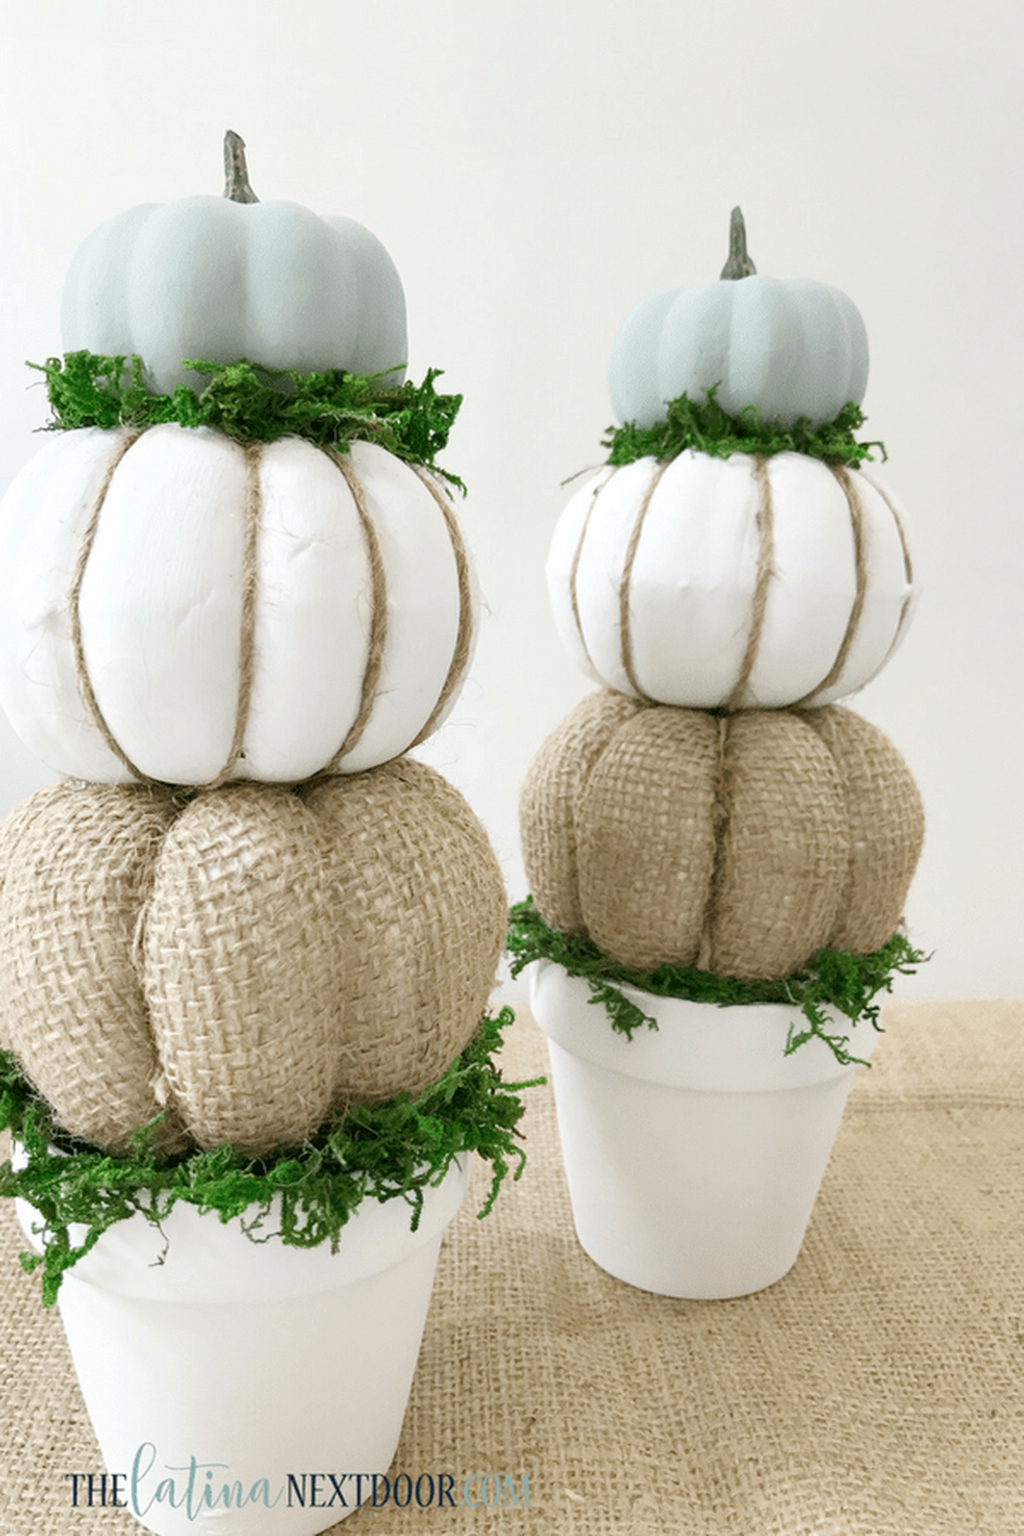 DIY pumpkin craft with white plant pot. pot holds three stacked pumpkins that are neutral colored